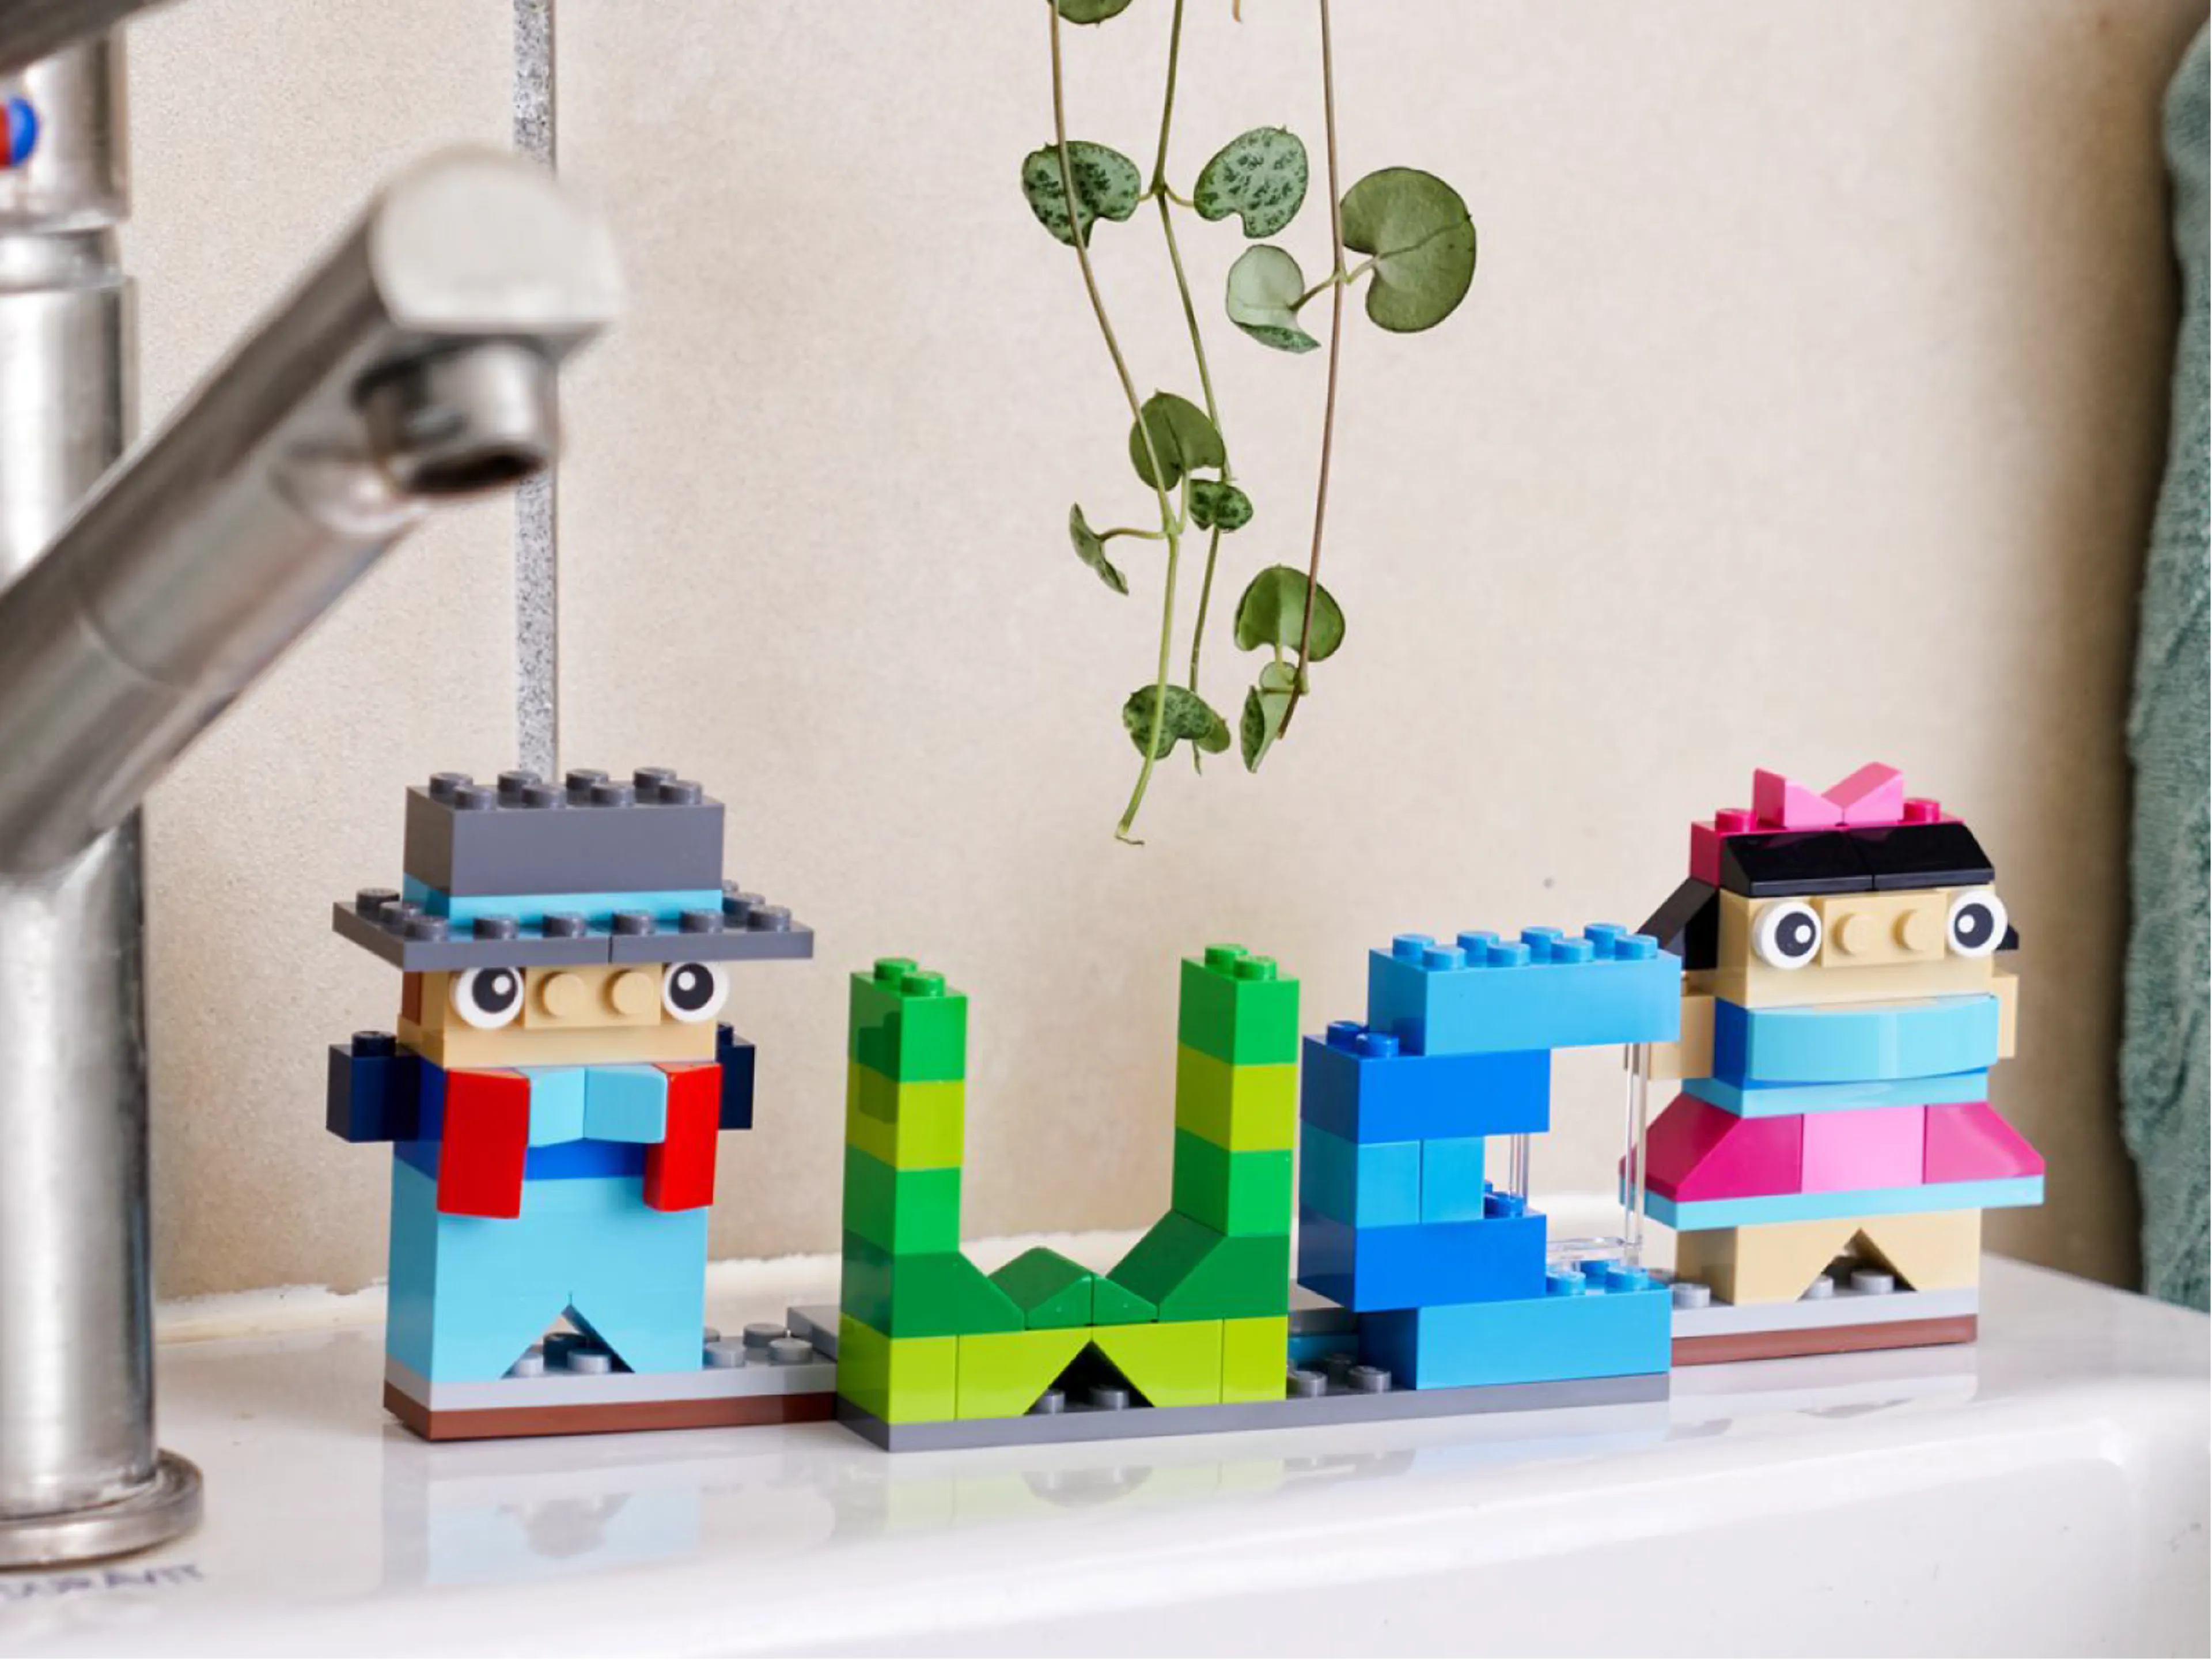 LEGO bricks in the shape of the letters WC